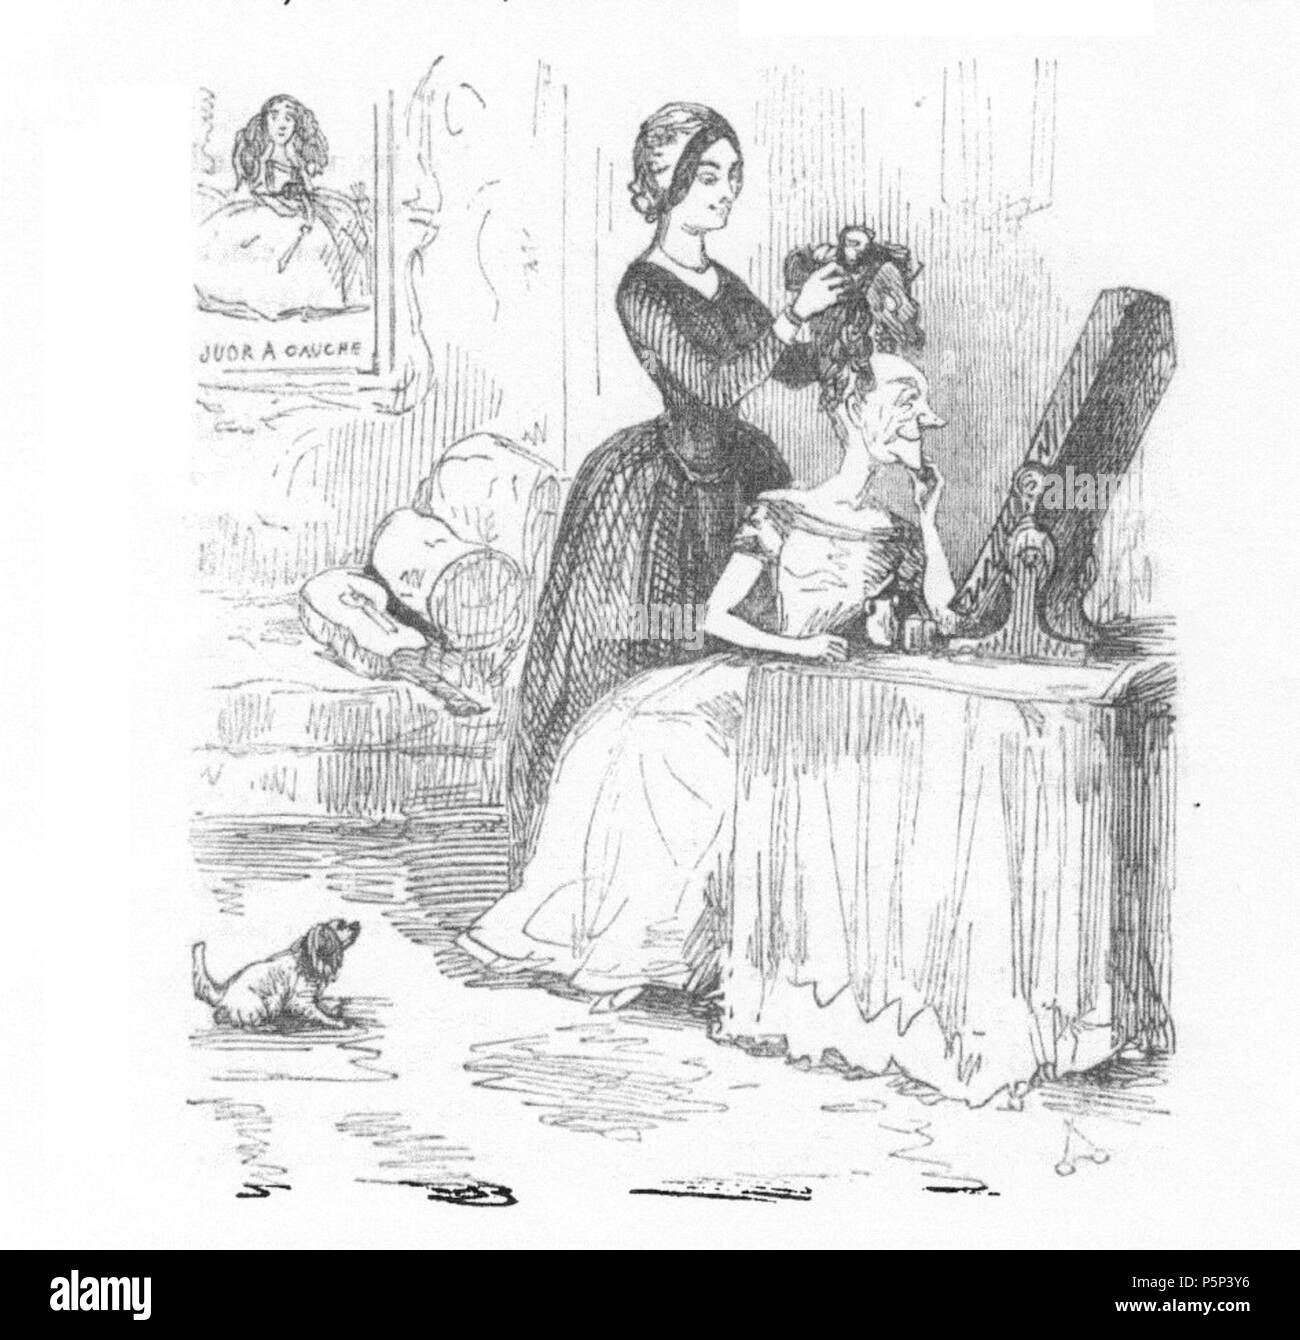 N/A. English: Engraving on wood by W. M. Thackeray himself, for the first edition of The Book of Snobs. Chapter XXXVII : Your French maid has completed the toilette which renders you so beautiful by candlelight. Français : Illustration du chapitre XXXVII 'Club snobs' de l'édition originale du Livre des snobs par l'auteur. Gravure sur bois, page 145. 1848.   William Makepeace Thackeray  (1811–1863)       Alternative names Thackeray; William Thackeray  Description English novelist and illustrator  Date of birth/death 18 July 1811 24 December 1863  Location of birth/death Calcutta London  Authori Stock Photo